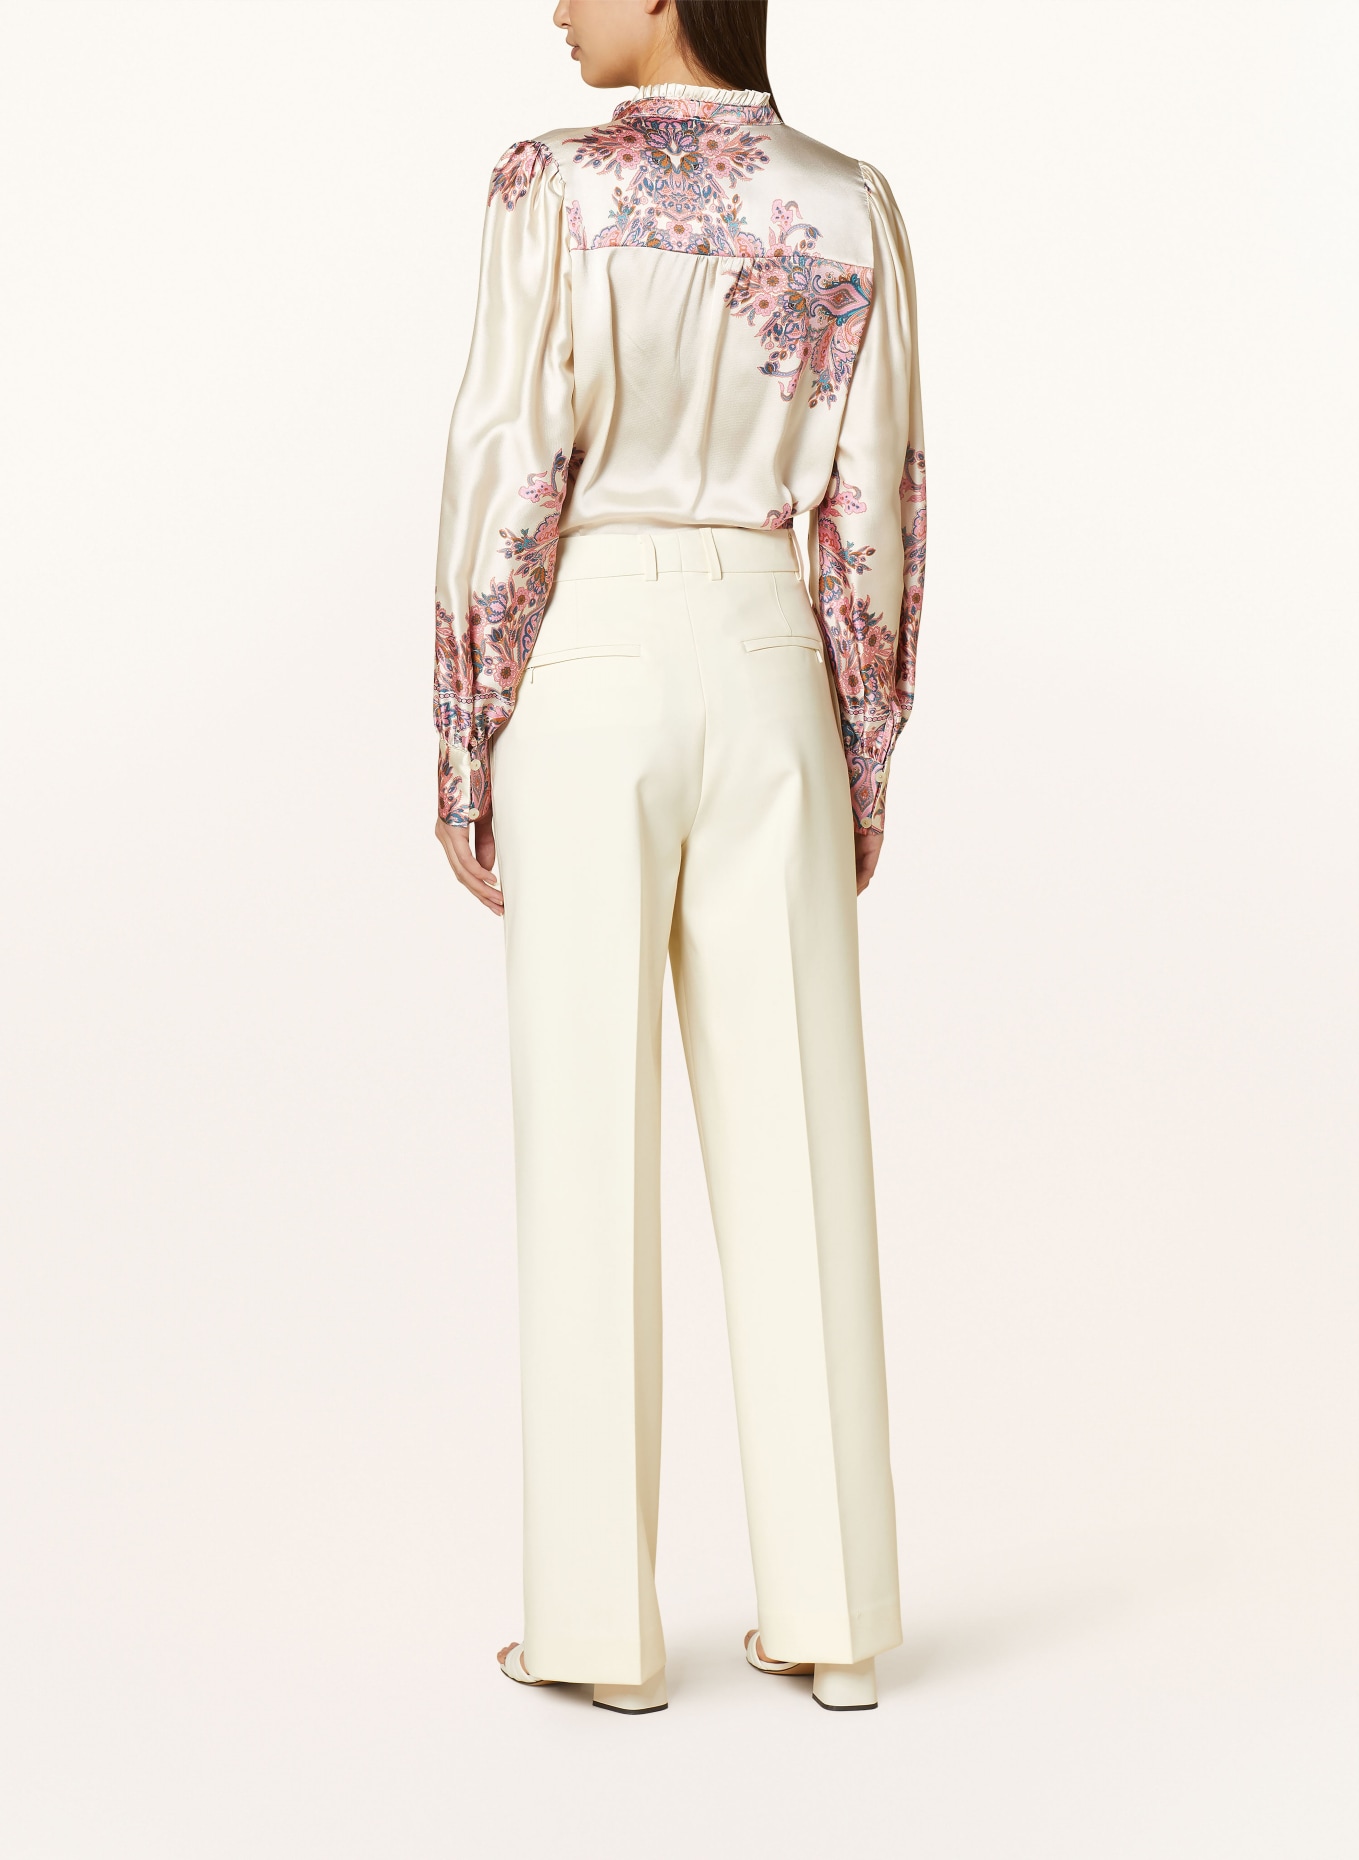 NEO NOIR Satin blouse MASSIMA with ruffles, Color: CREAM/ PINK/ TEAL (Image 3)